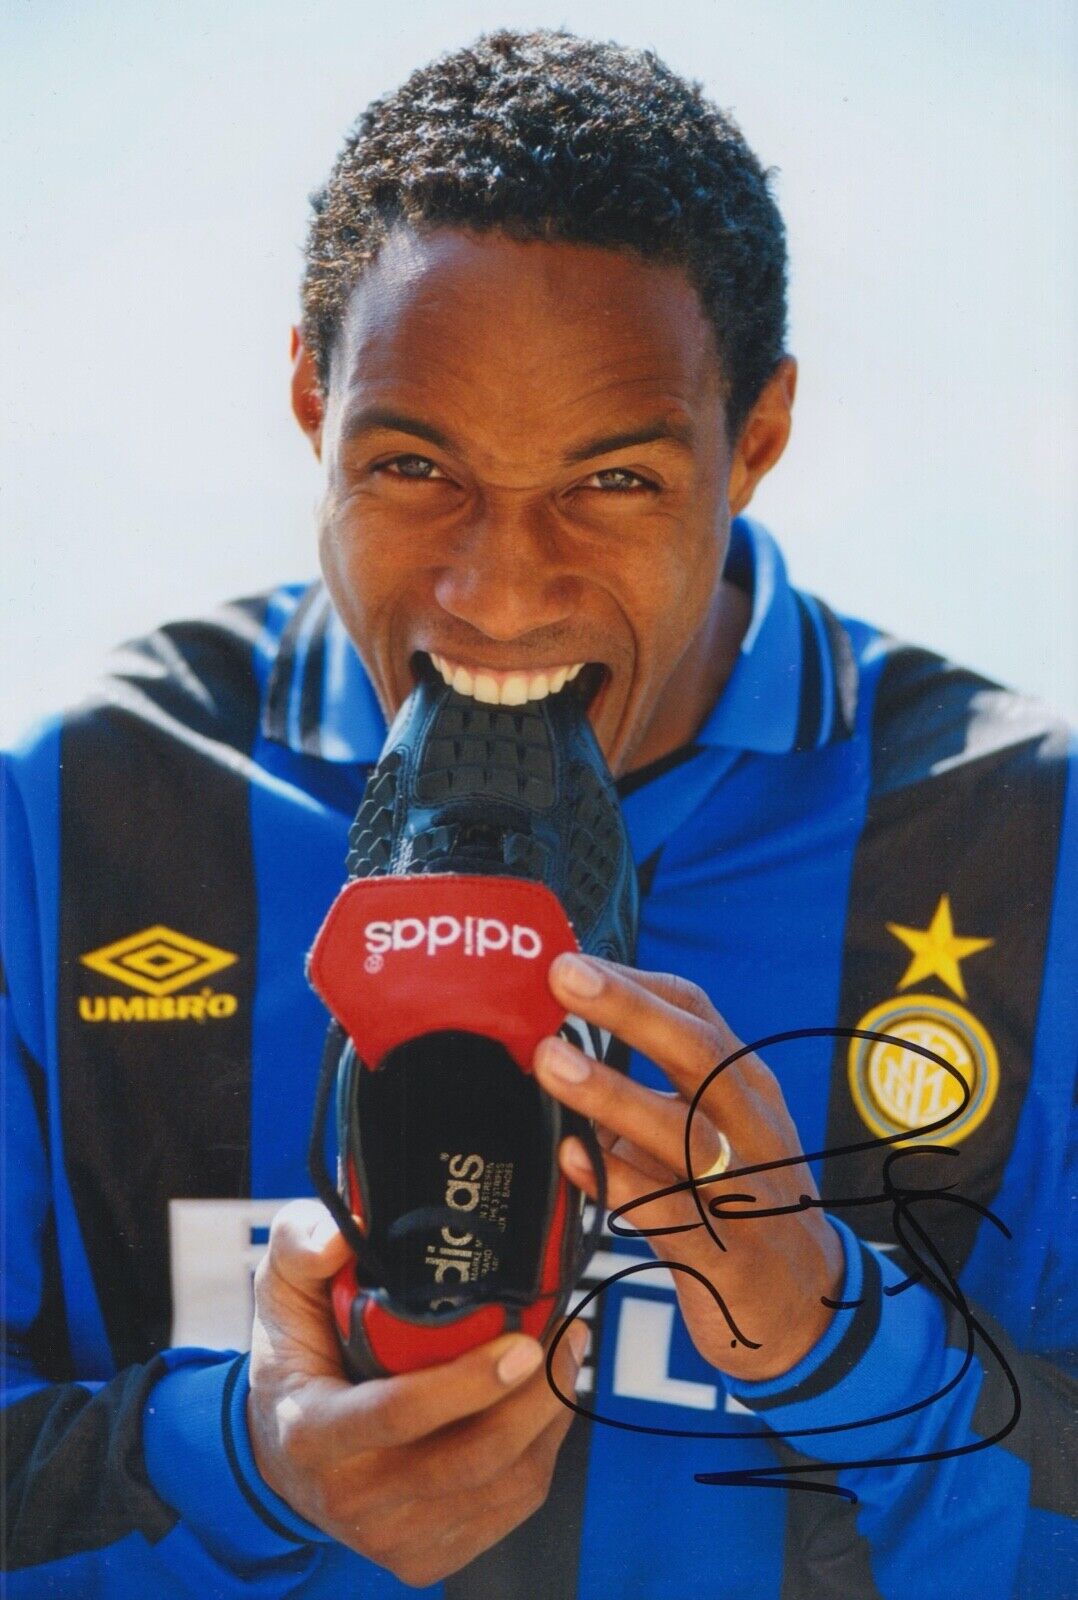 PAUL INCE HAND SIGNED 12X8 Photo Poster painting INTER MILAN AUTOGRAPH FOOTBALL 2